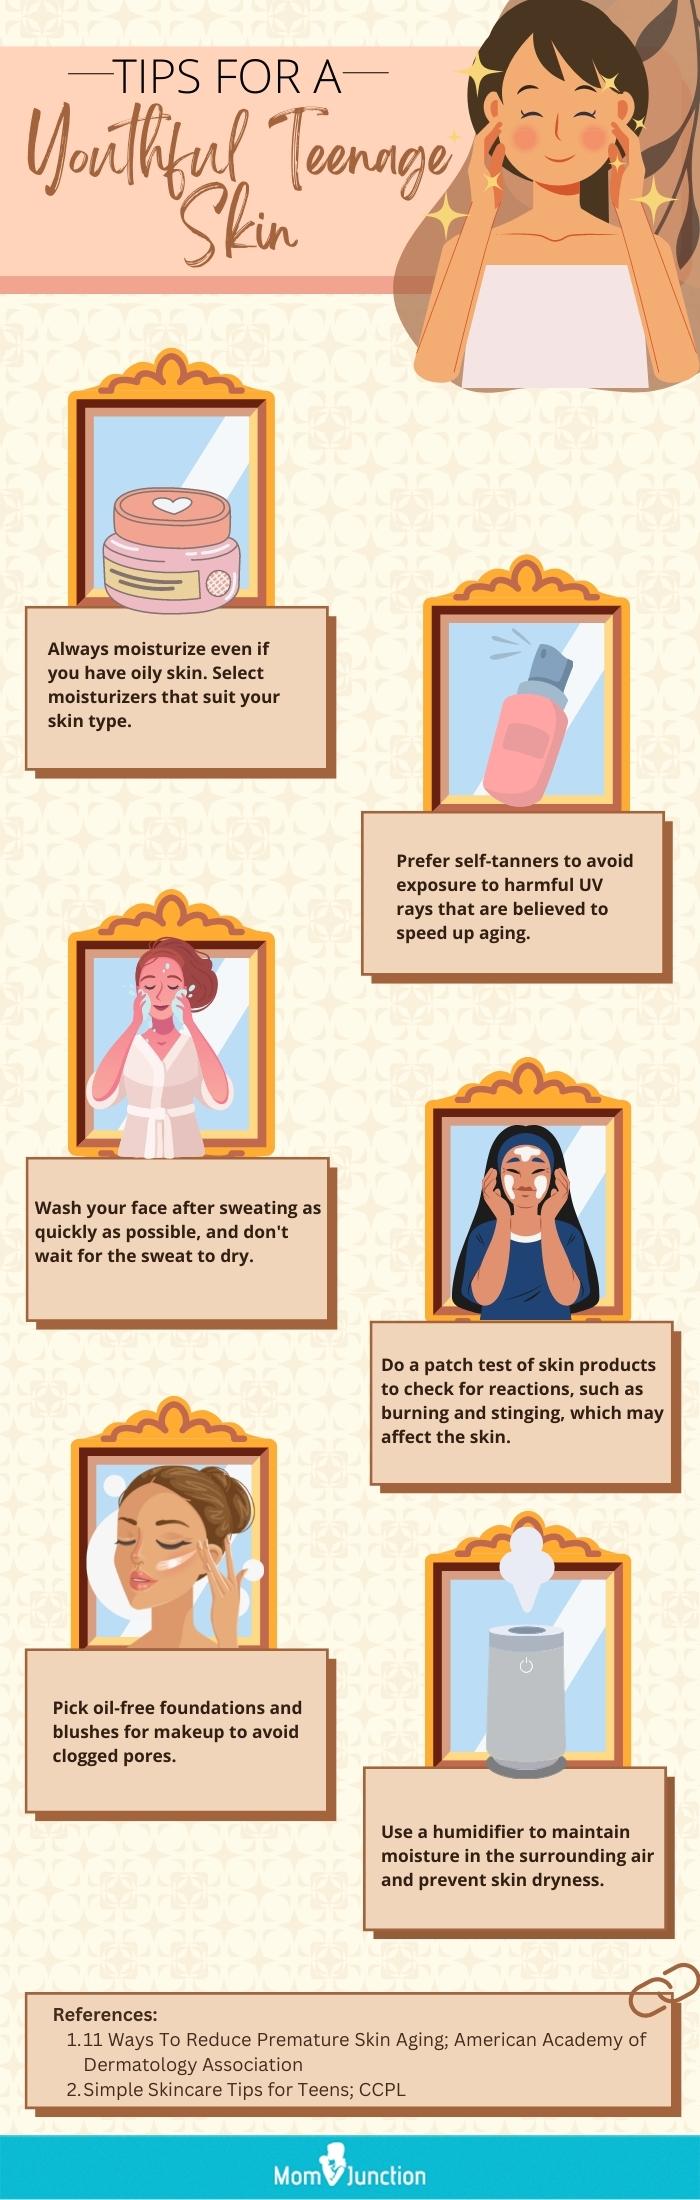 tips for a youthful teenage skin (infographic)